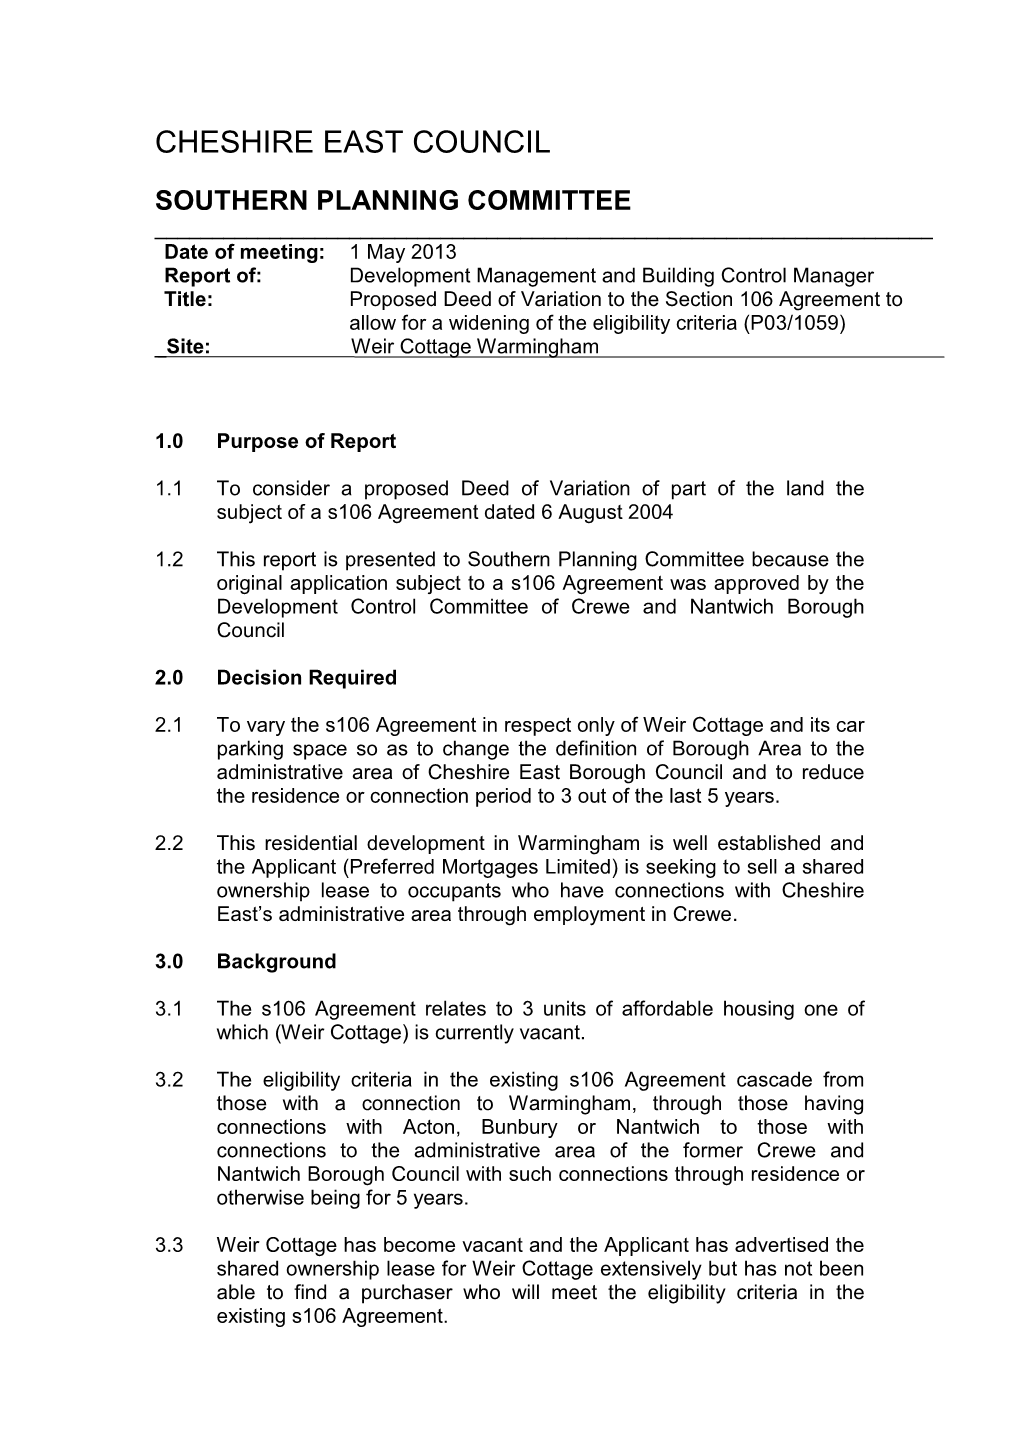 Proposed Deed of Variation to the Section 106 Agreement to Allow for a Widening of the Eligibility Criteria (P03/1059) Site: Weir Cottage Warmingham